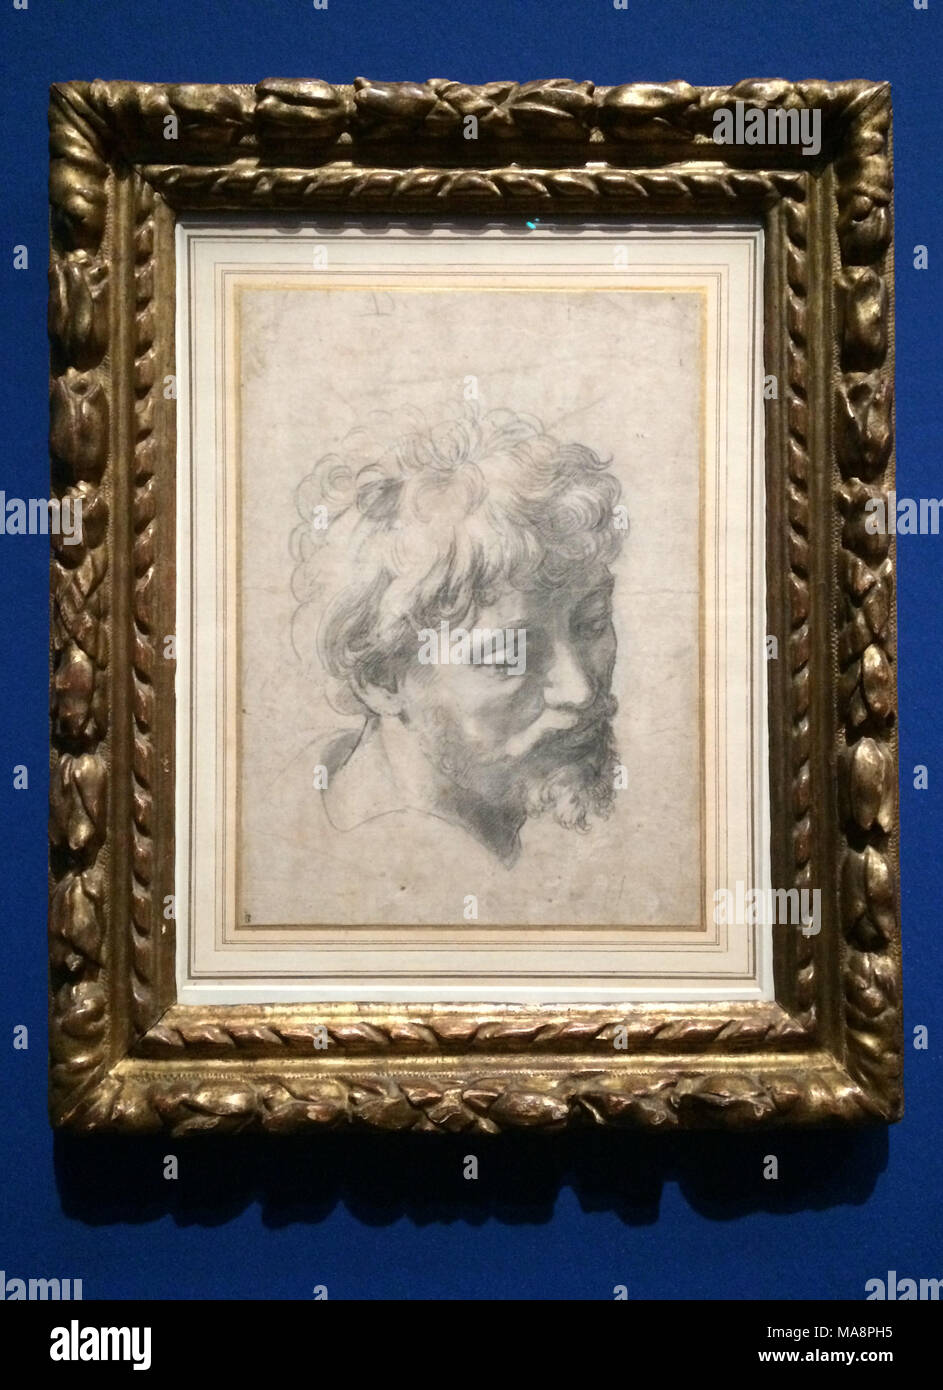 Black chalk drawing 'Head of a Young Apostle' (1518-1520) by Italian Renaissance painter Raphael on display at his retrospective exhibition in the Albertina Museum in Vienna, Austria. The drawing became the most expensive work on paper in the world after it was sold for £29.7 million on the Sotheby's in December 2012. The exhibition runs till 7 January 2018. Stock Photo